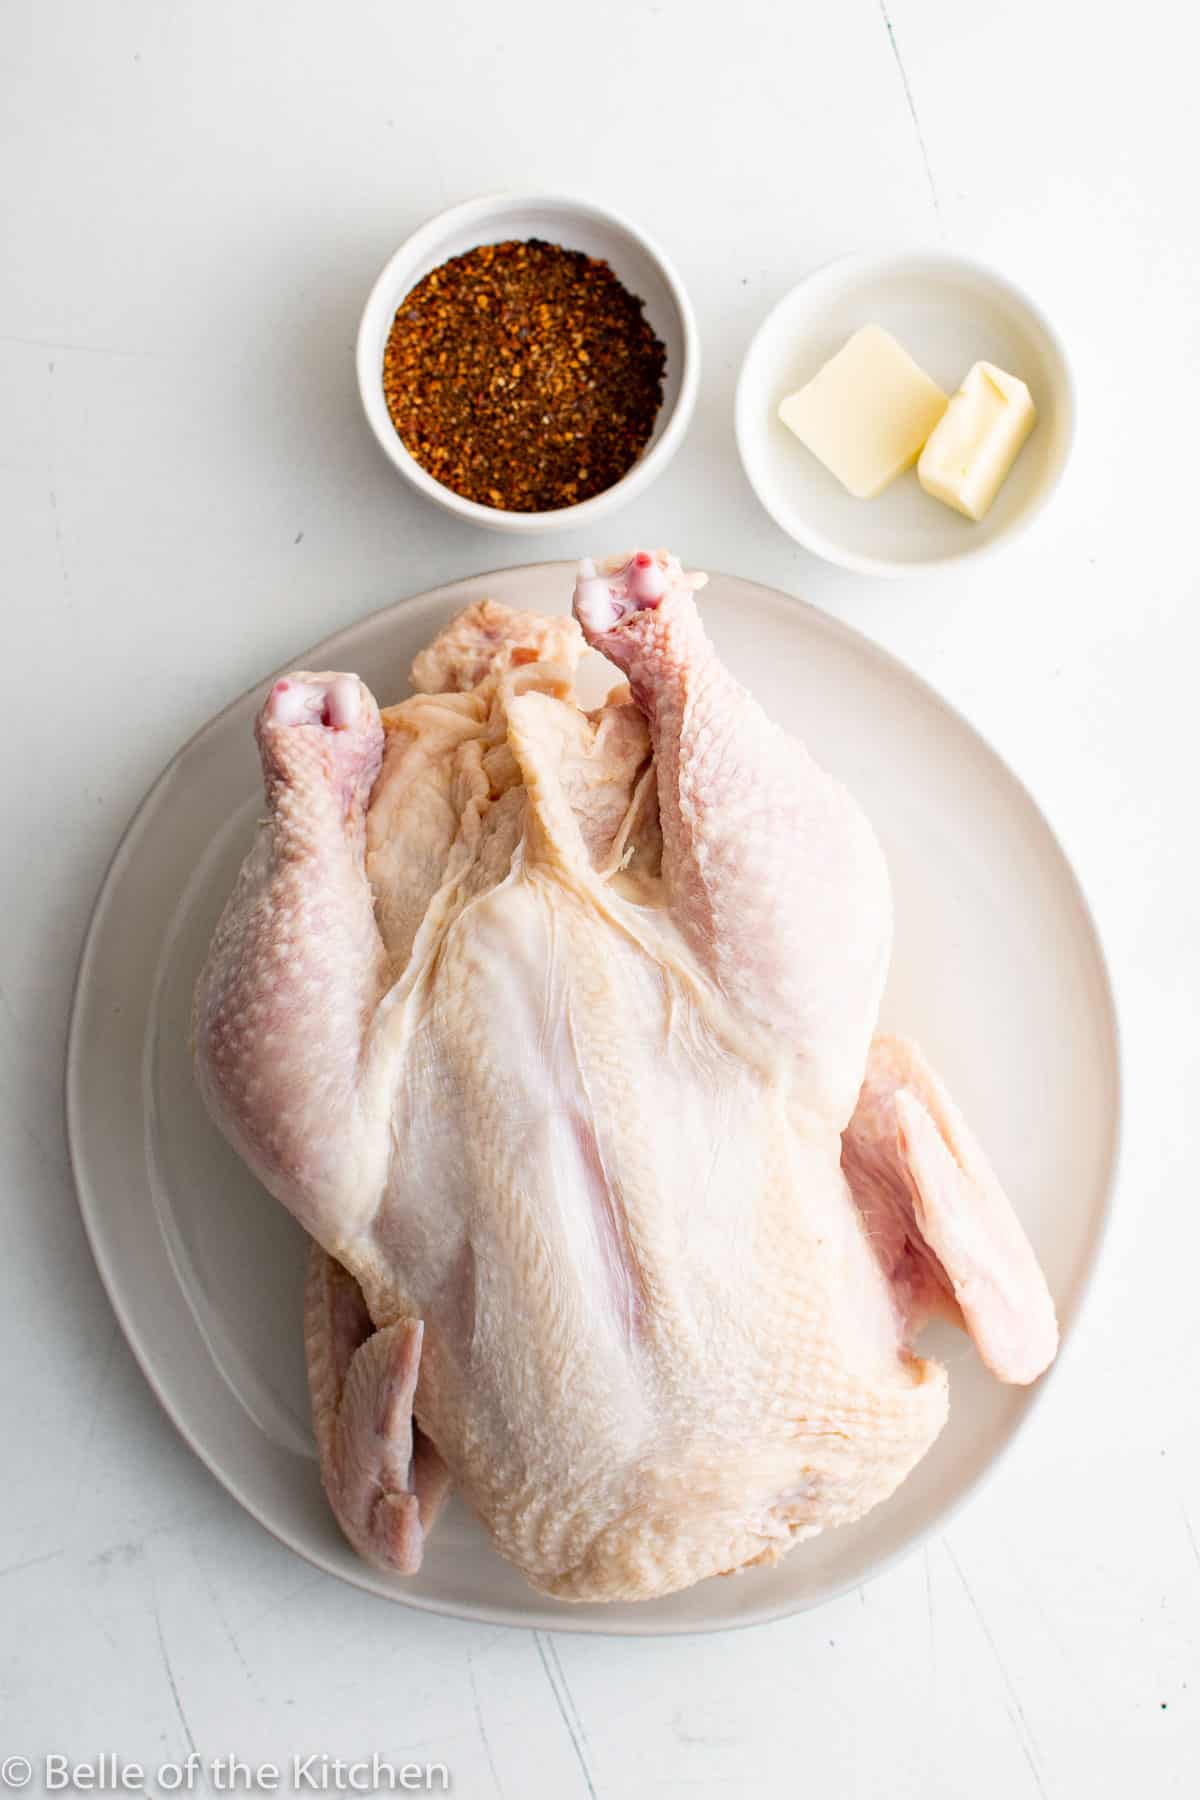 a whole raw chicken on a plate next to seasoning and butter.